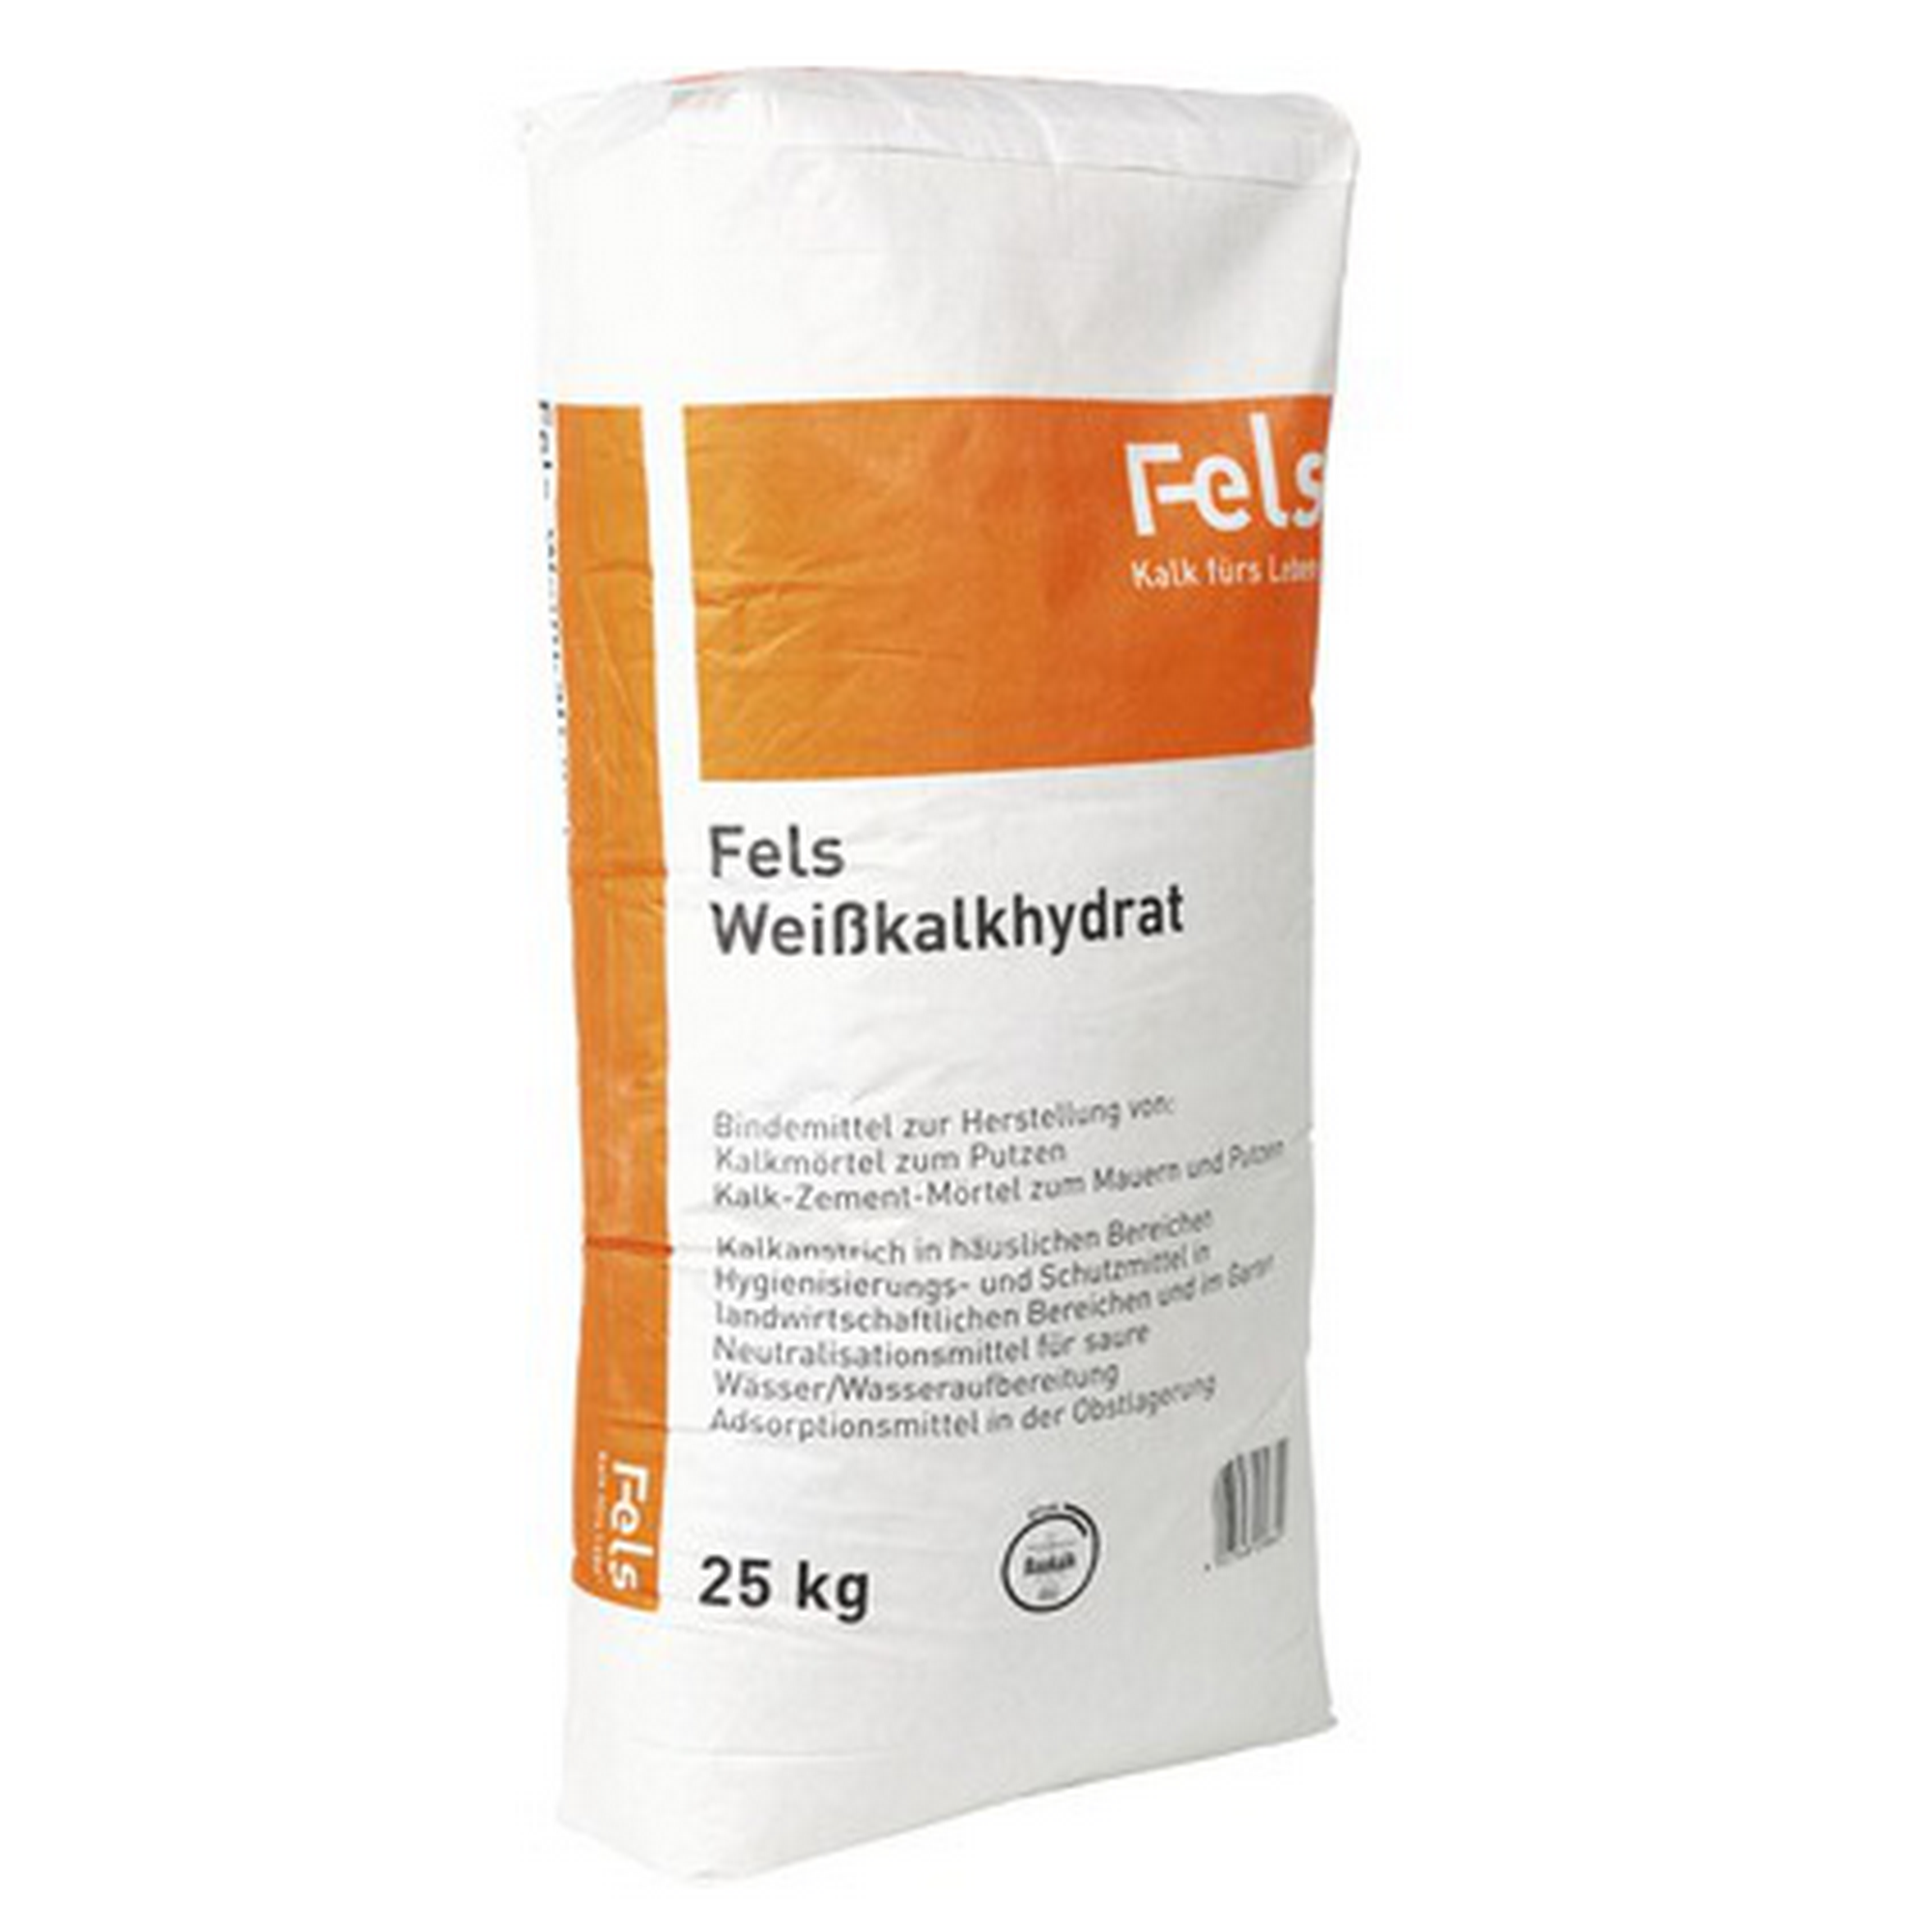 Weißkalkhydrat 25 kg + product picture